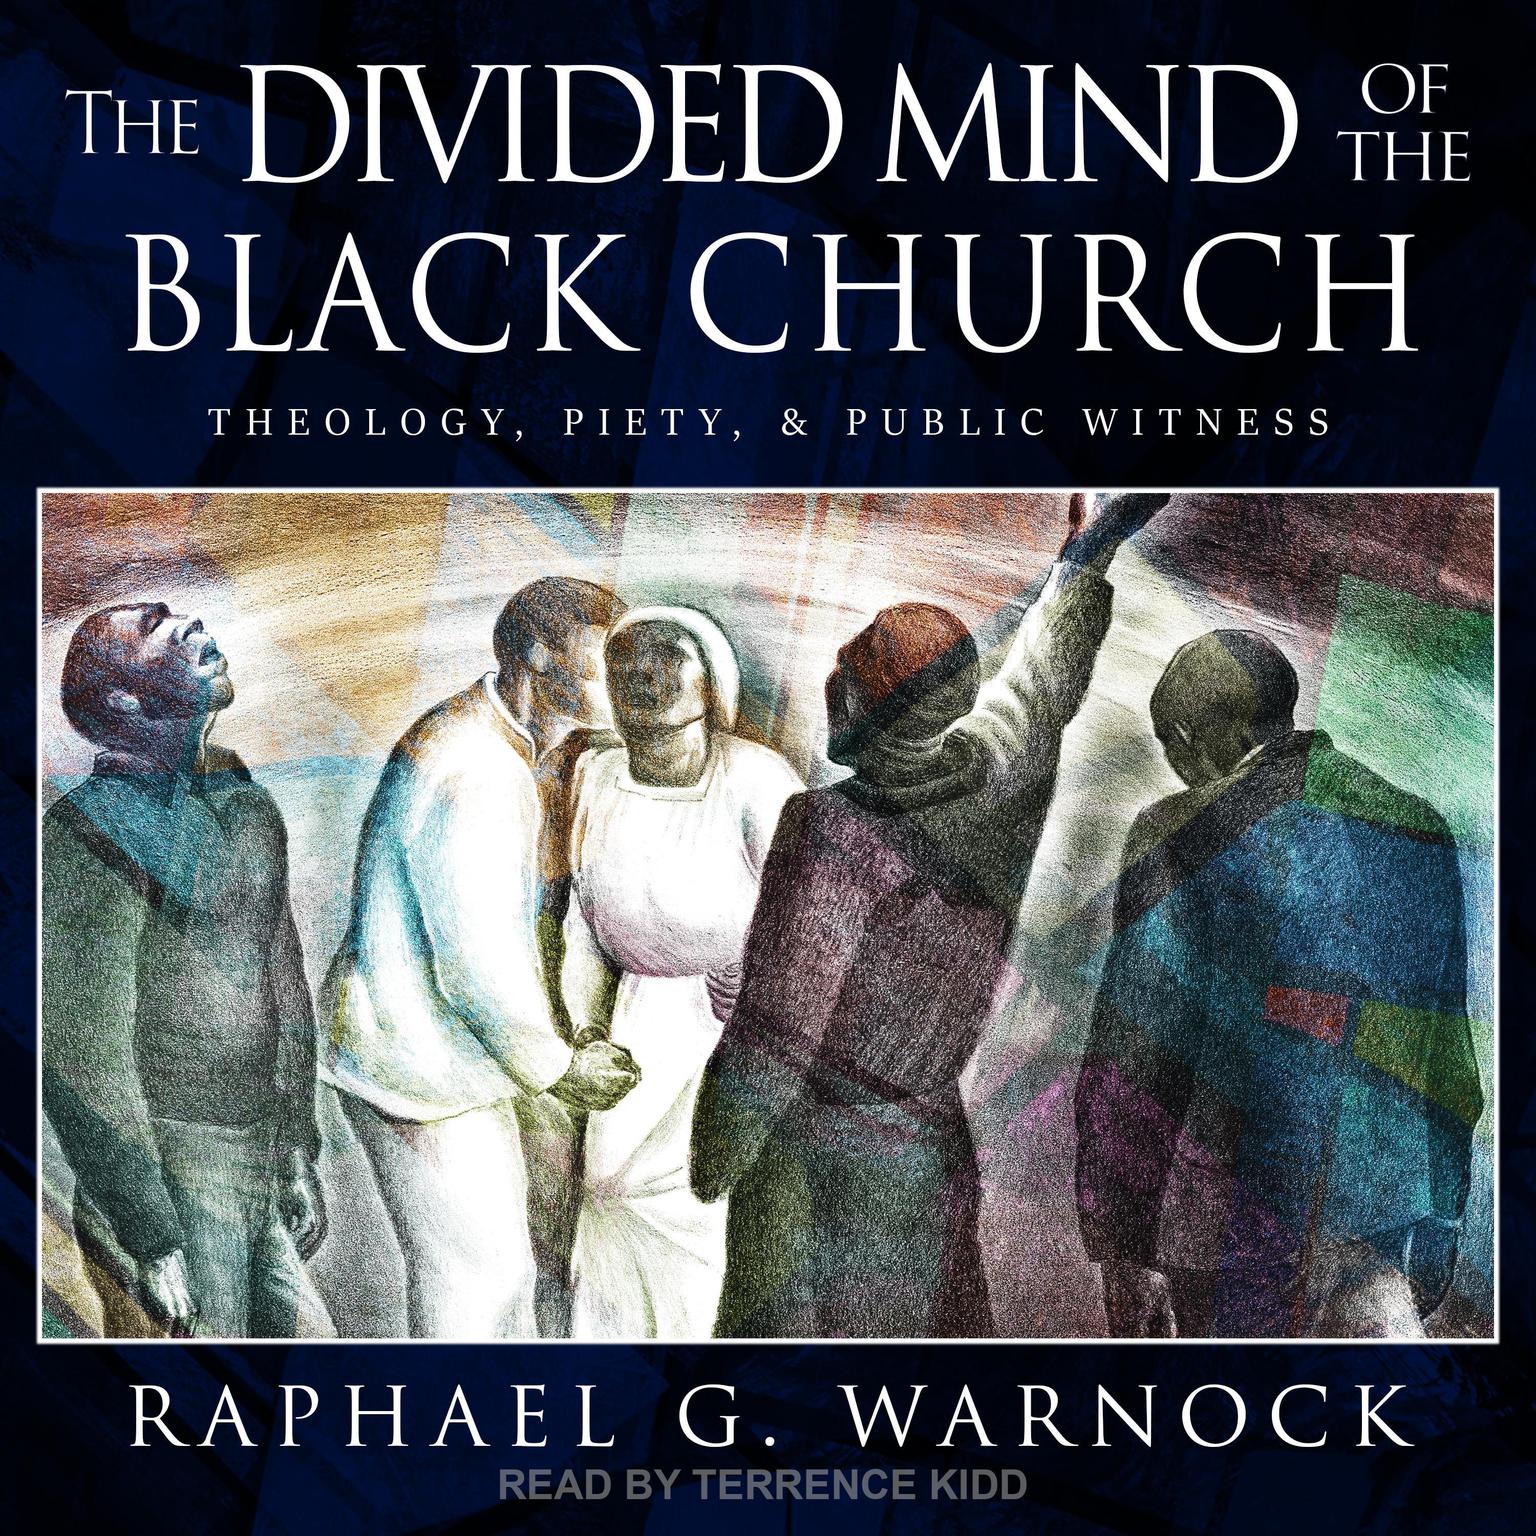 The Divided Mind of the Black Church: Theology, Piety, and Public Witness Audiobook, by Rev. Raphael G. Warnock